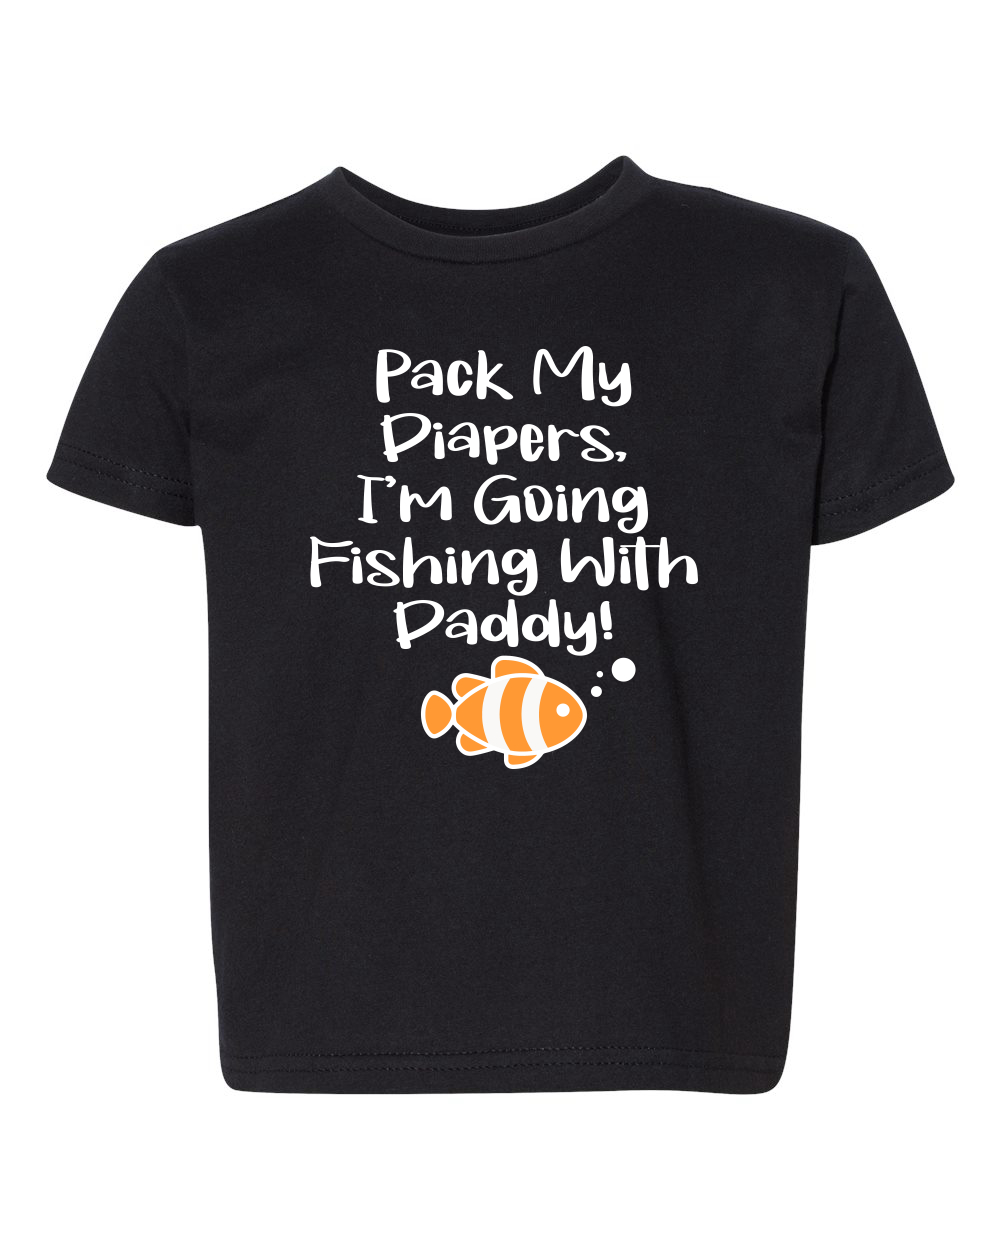 I'M GOING FISHING WITH DADDY Fisherman Tackle Baby T-Shirt PACK MY NAPPIES 